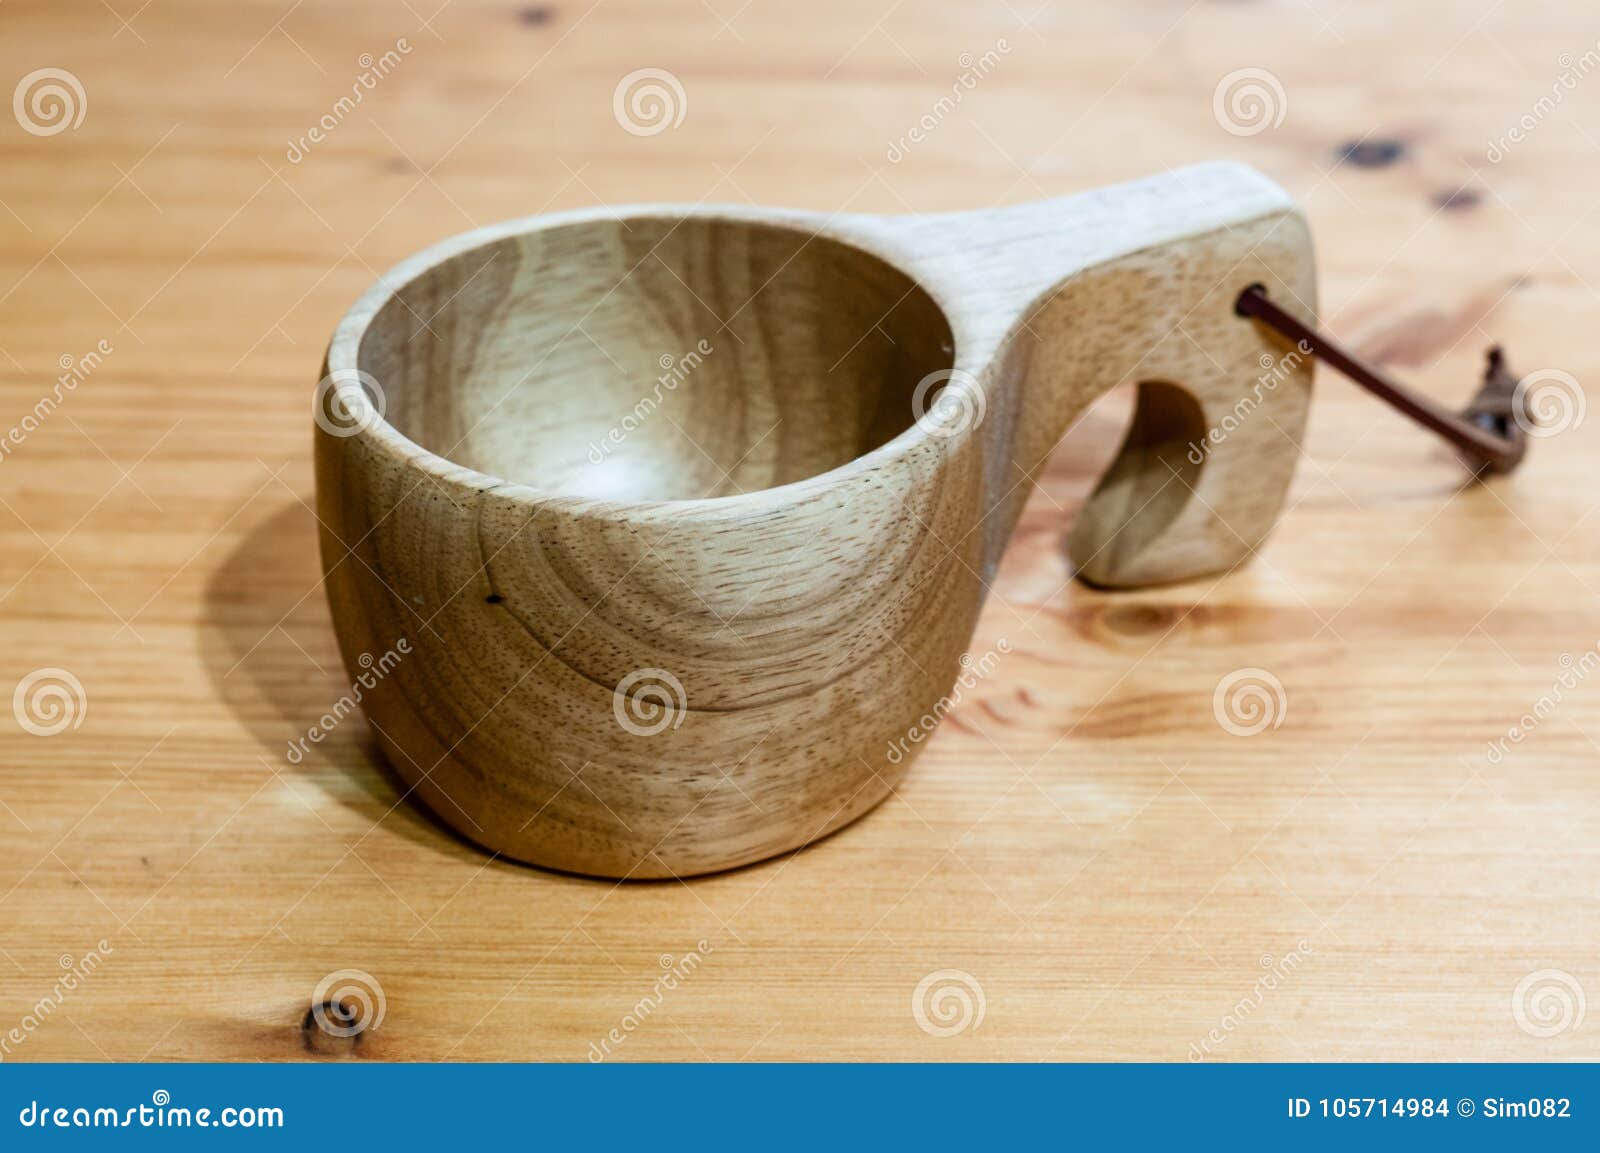 https://thumbs.dreamstime.com/z/kuksa-traditional-wooden-finnish-cup-called-105714984.jpg